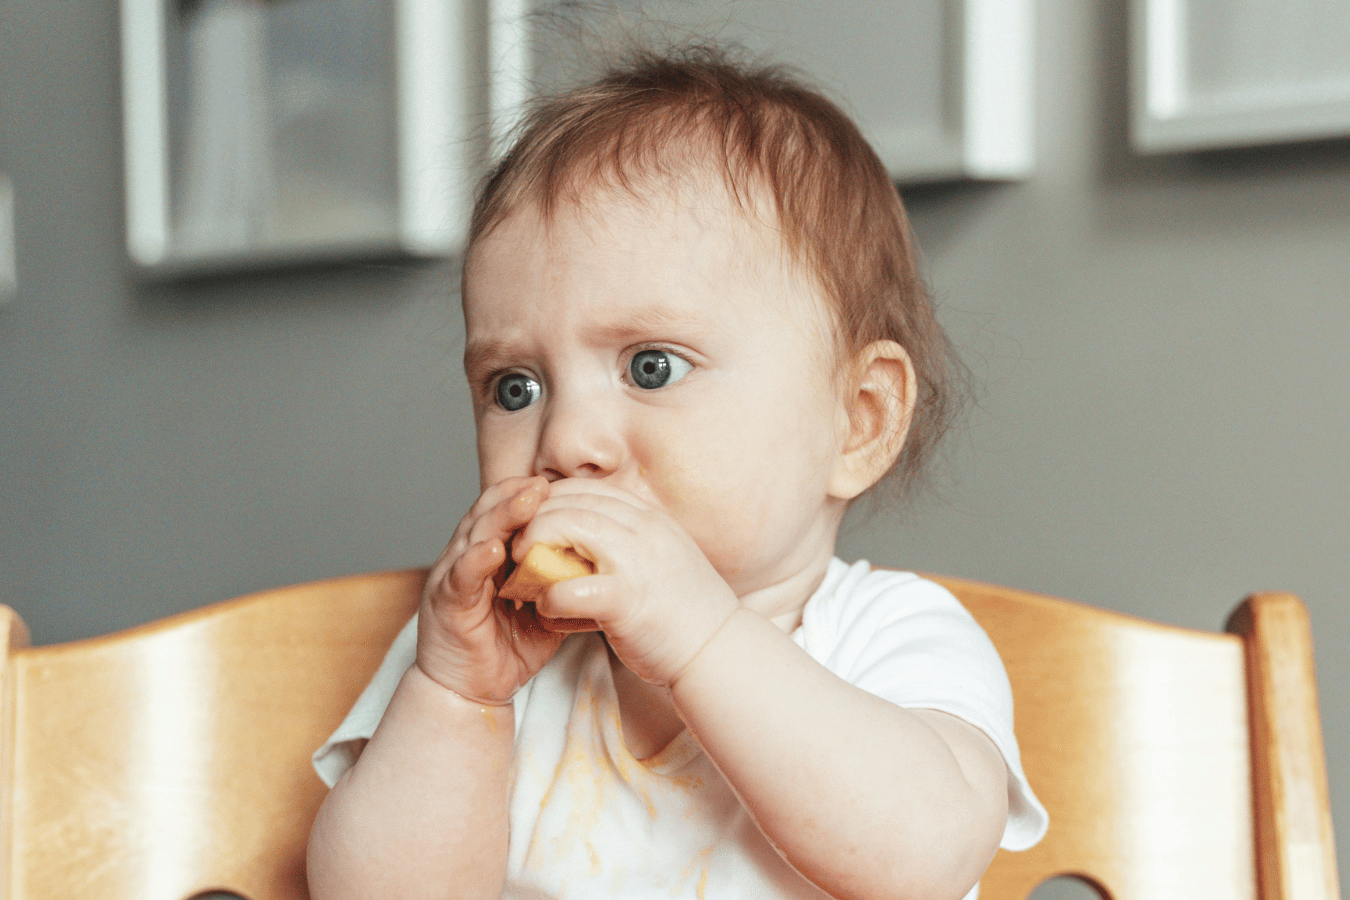 Baby feeding itself solids-baby led weaning vs purees- Mila's Keeper